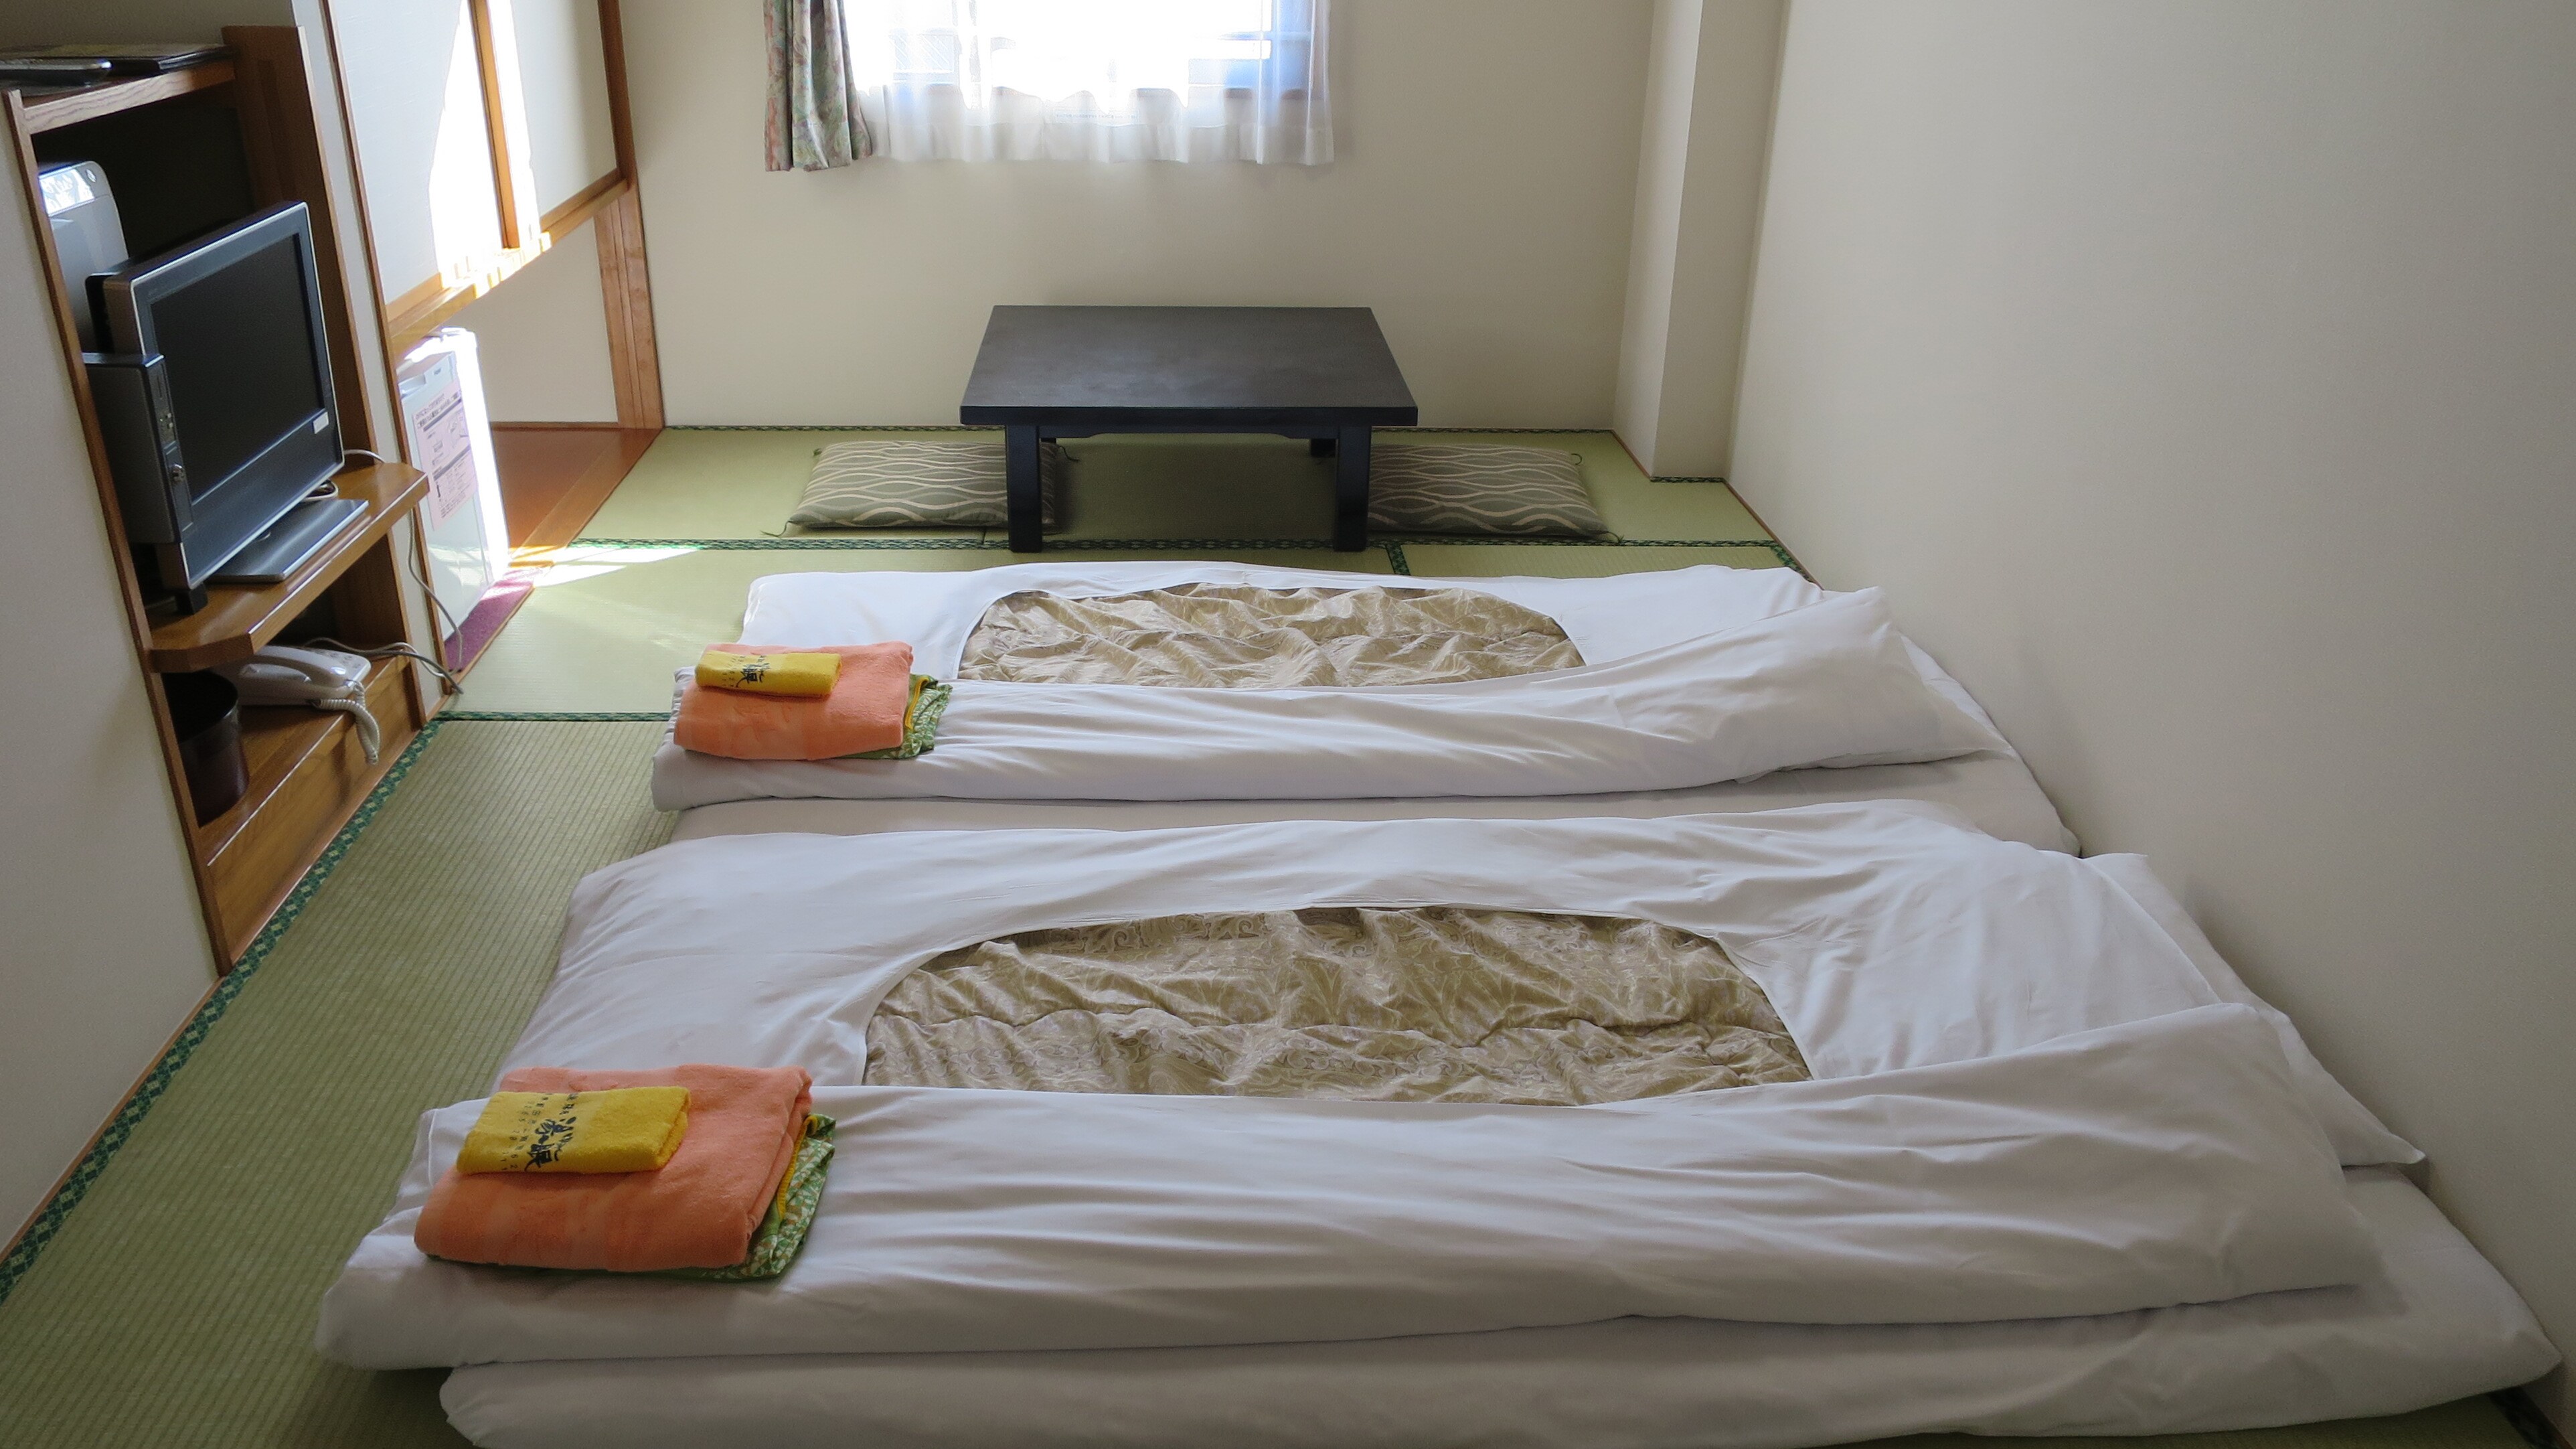 ◆ Japanese-style room for 2 people ◆